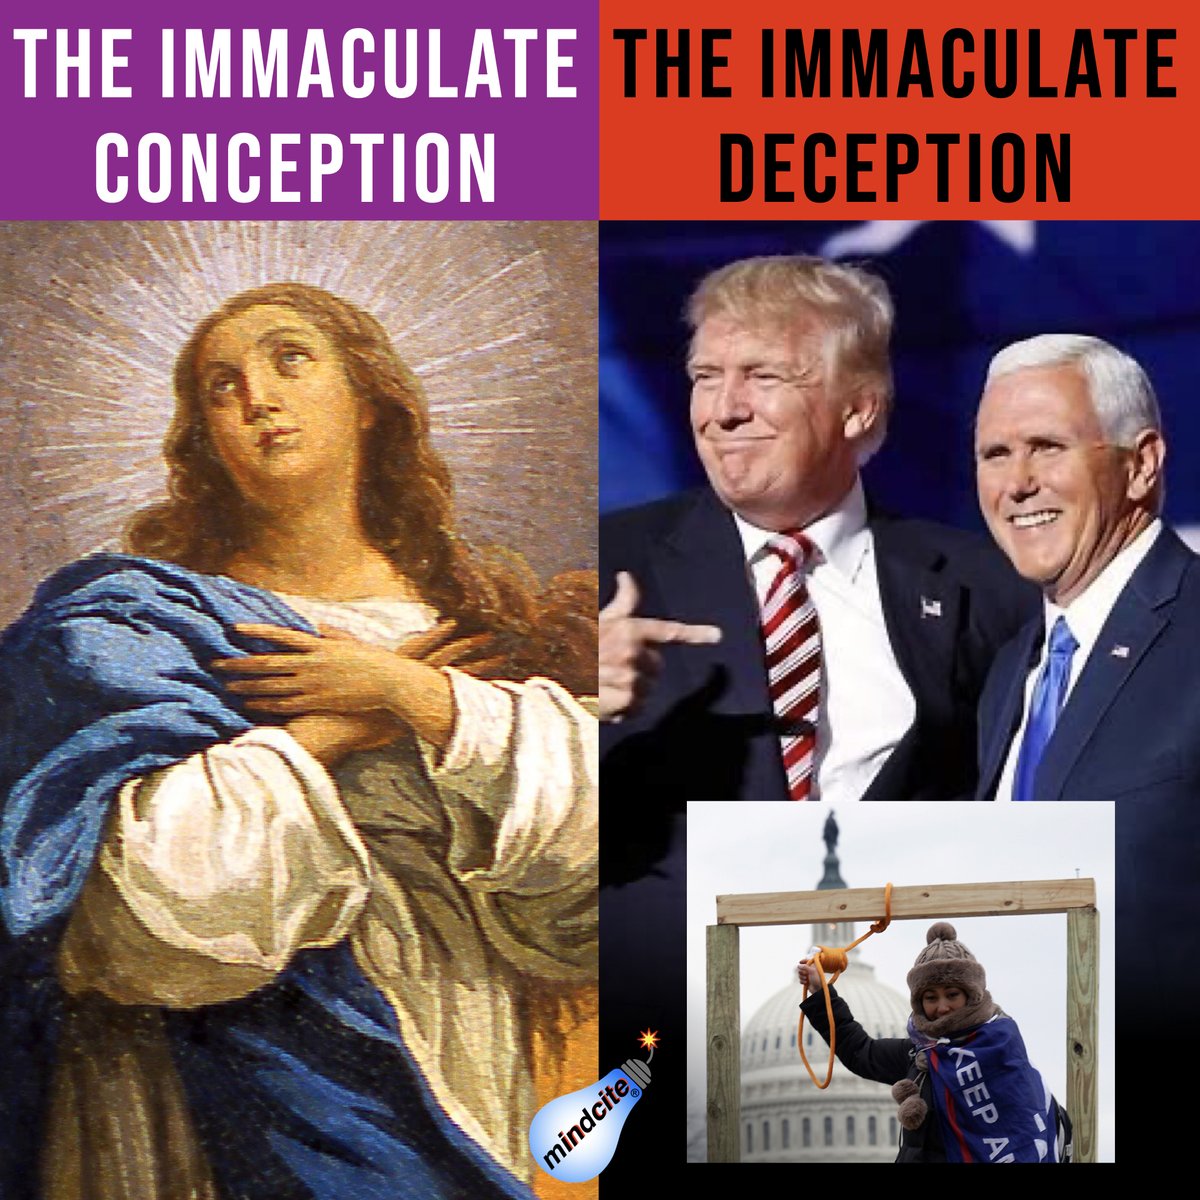 “And the angel said unto her, Fear not, Mary: for thou hast found favour with God.” -Luke 1:30-33 “Hang Mike Pence!” -Trump worshippers 1-6-2021 Vote Blue to save Christians and America‼️ #BibleBuild #SundayService